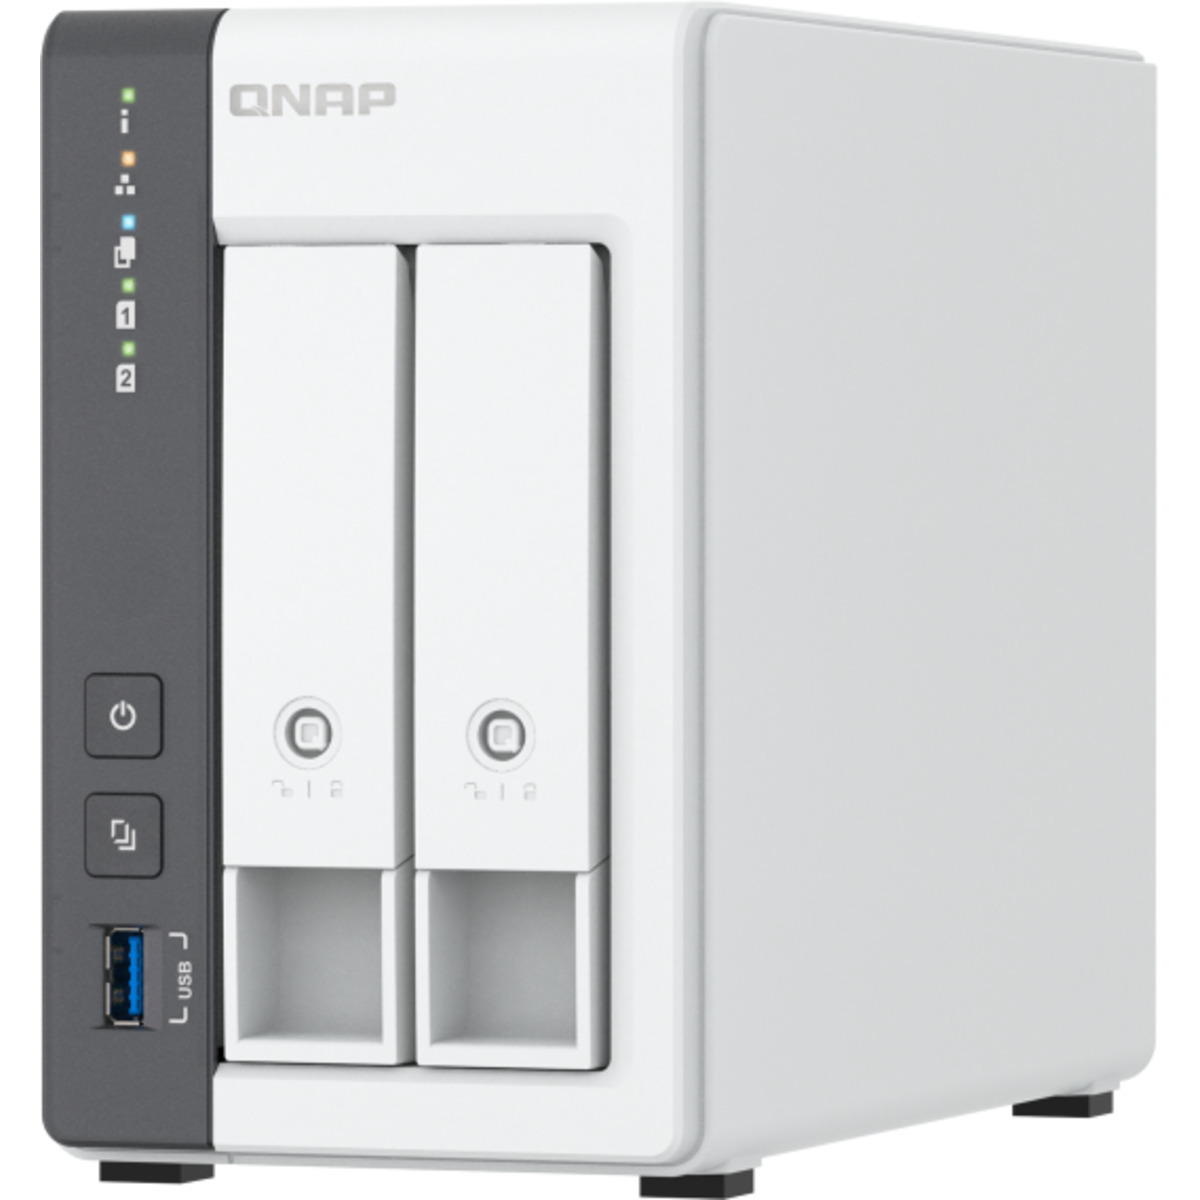 QNAP TS-216G 20tb 2-Bay Desktop Personal / Basic Home / Small Office NAS - Network Attached Storage Device 2x10tb Seagate IronWolf Pro ST10000NT001 3.5 7200rpm SATA 6Gb/s HDD NAS Class Drives Installed - Burn-In Tested - ON SALE TS-216G